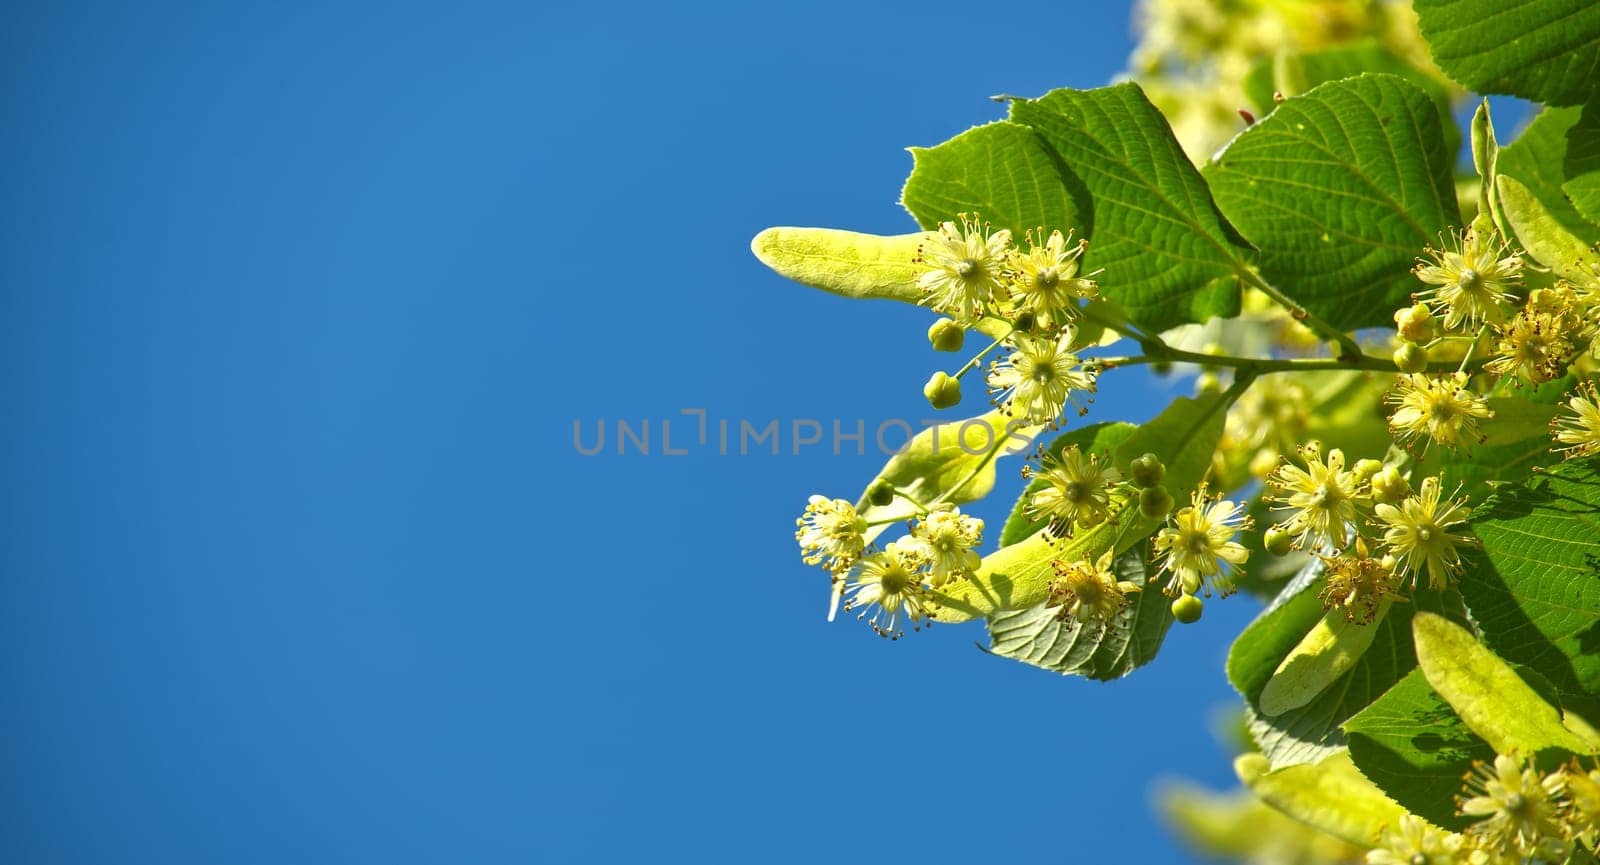 Linden tree branch adorned with small yellow flowers and surrounded by large green leaves the sun illuminates the leaves and flowers, highlighting their textures